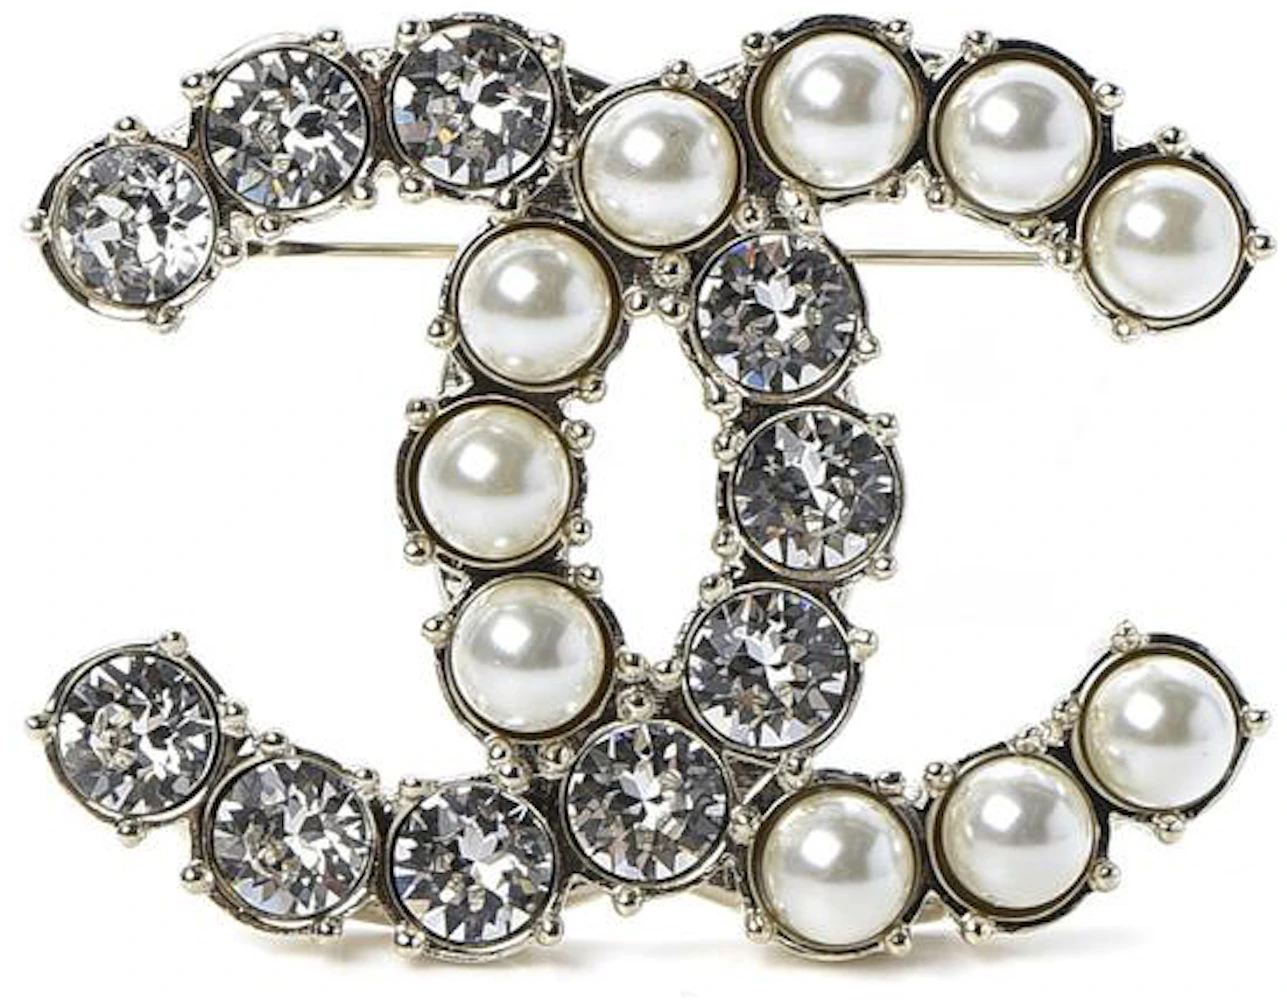 CHANEL, Jewelry, Chanel Turnlock Brooch Gold Large 43285